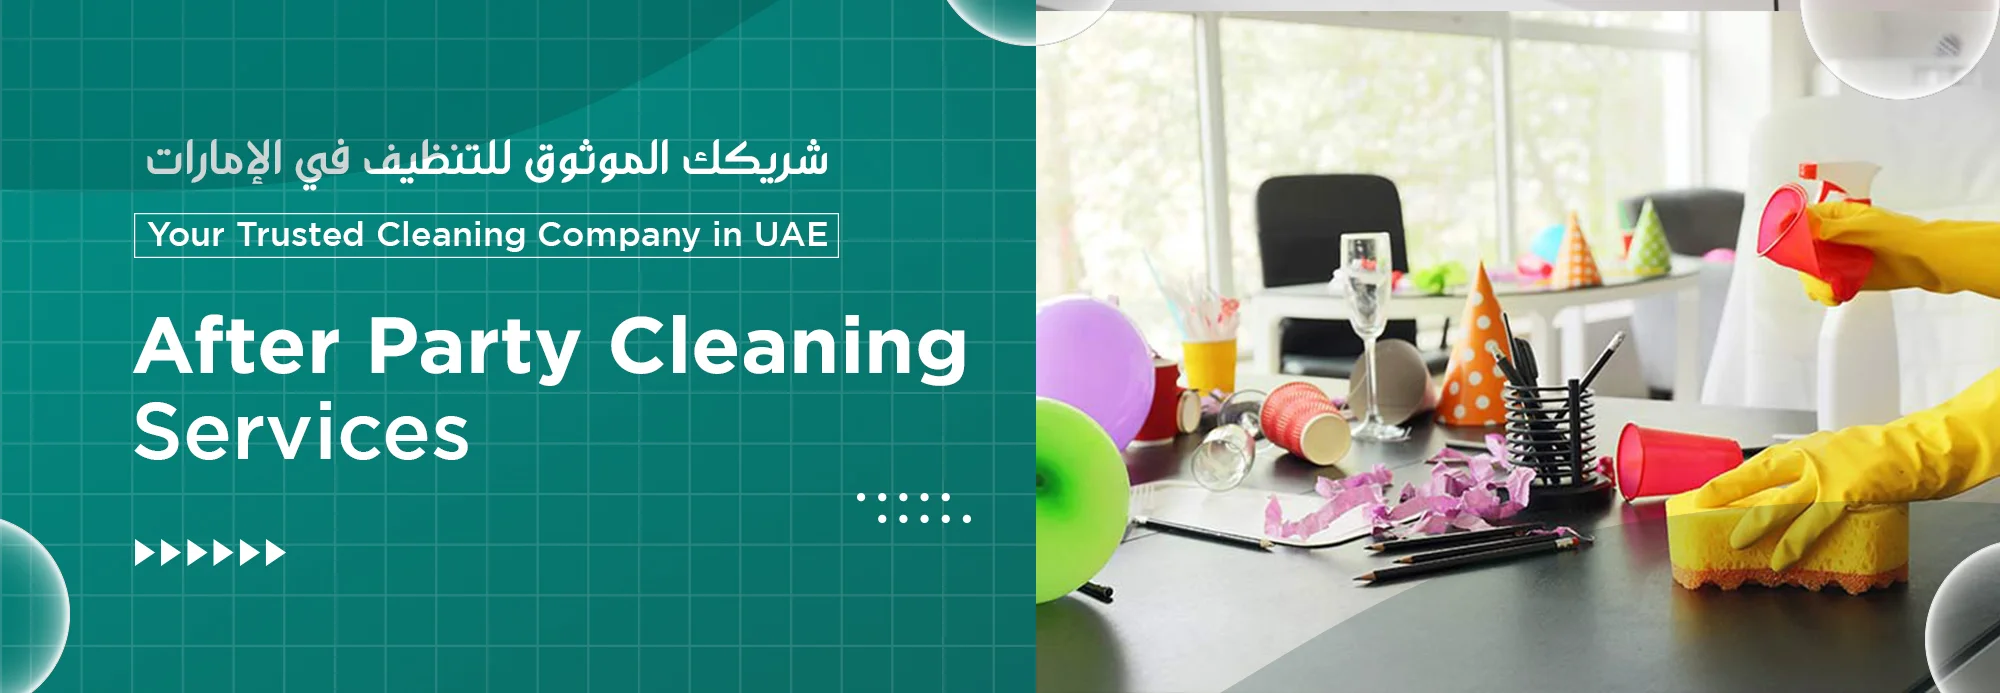 after party cleaning service dubai